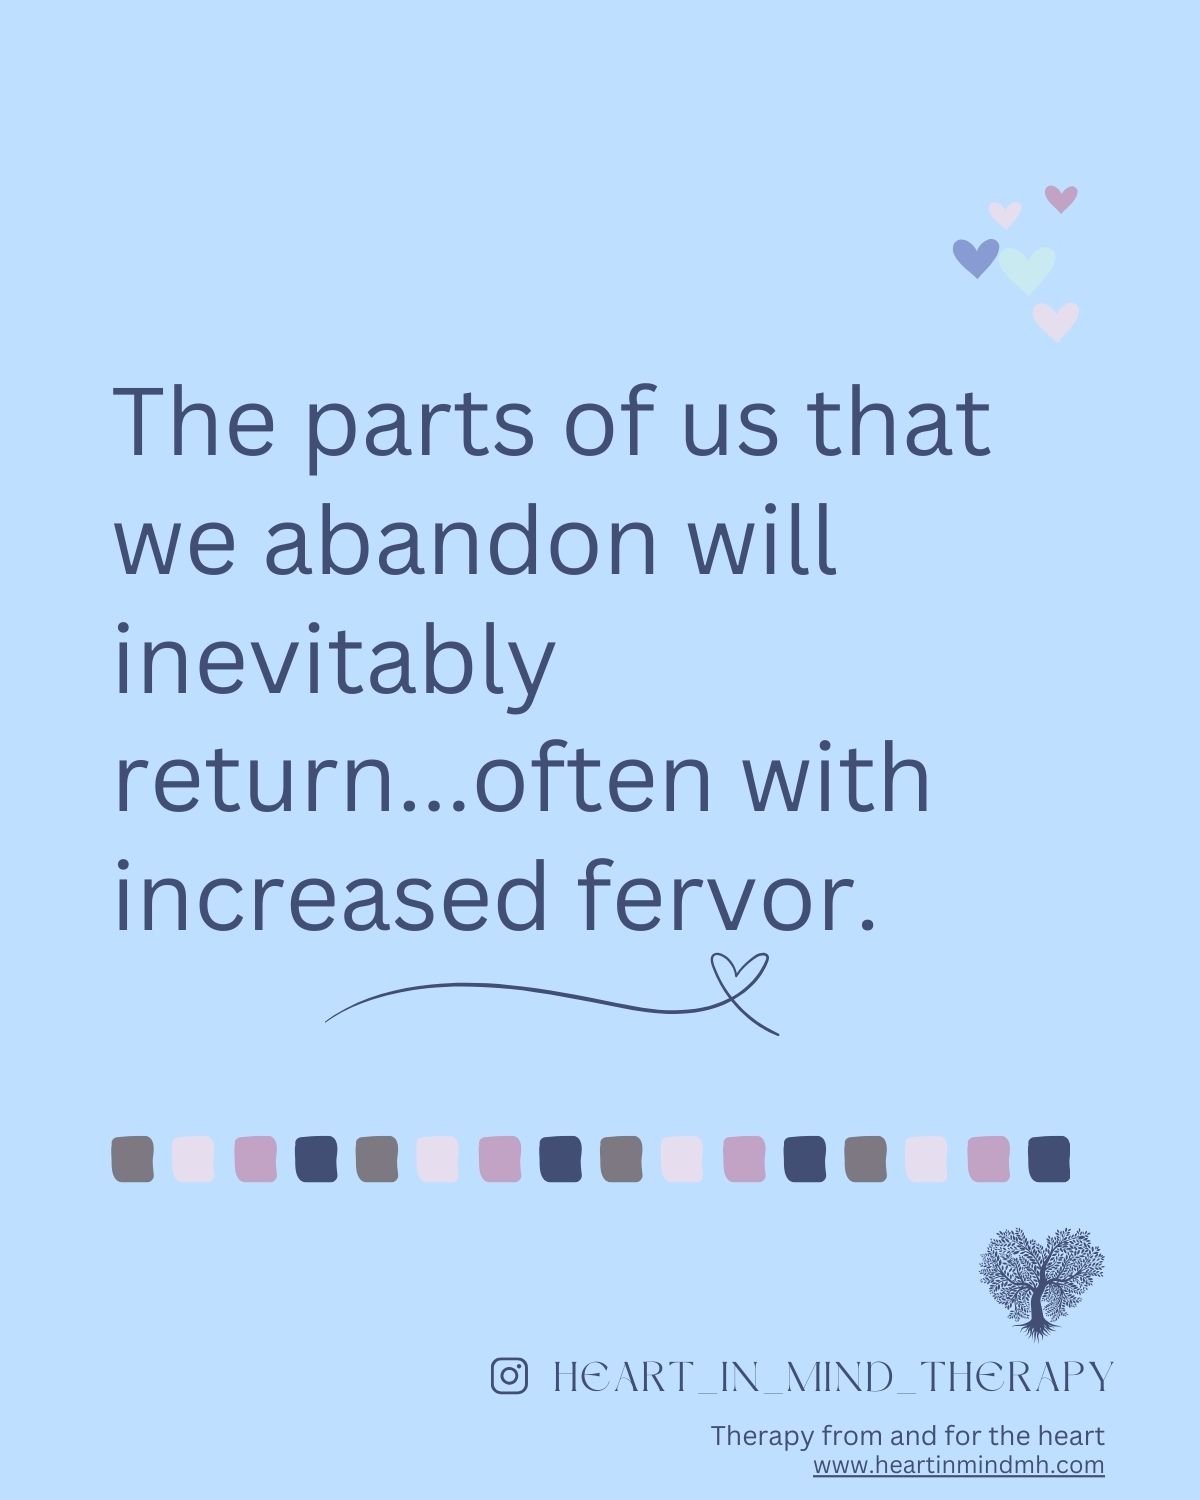 When we're are in pain (both emotional and physical), it's natural to abandon certain parts of ourselves in order to &quot;pull through.&quot;

It can be helpful to displace/abandon the more vulnerable parts of us because what we need in that moment 